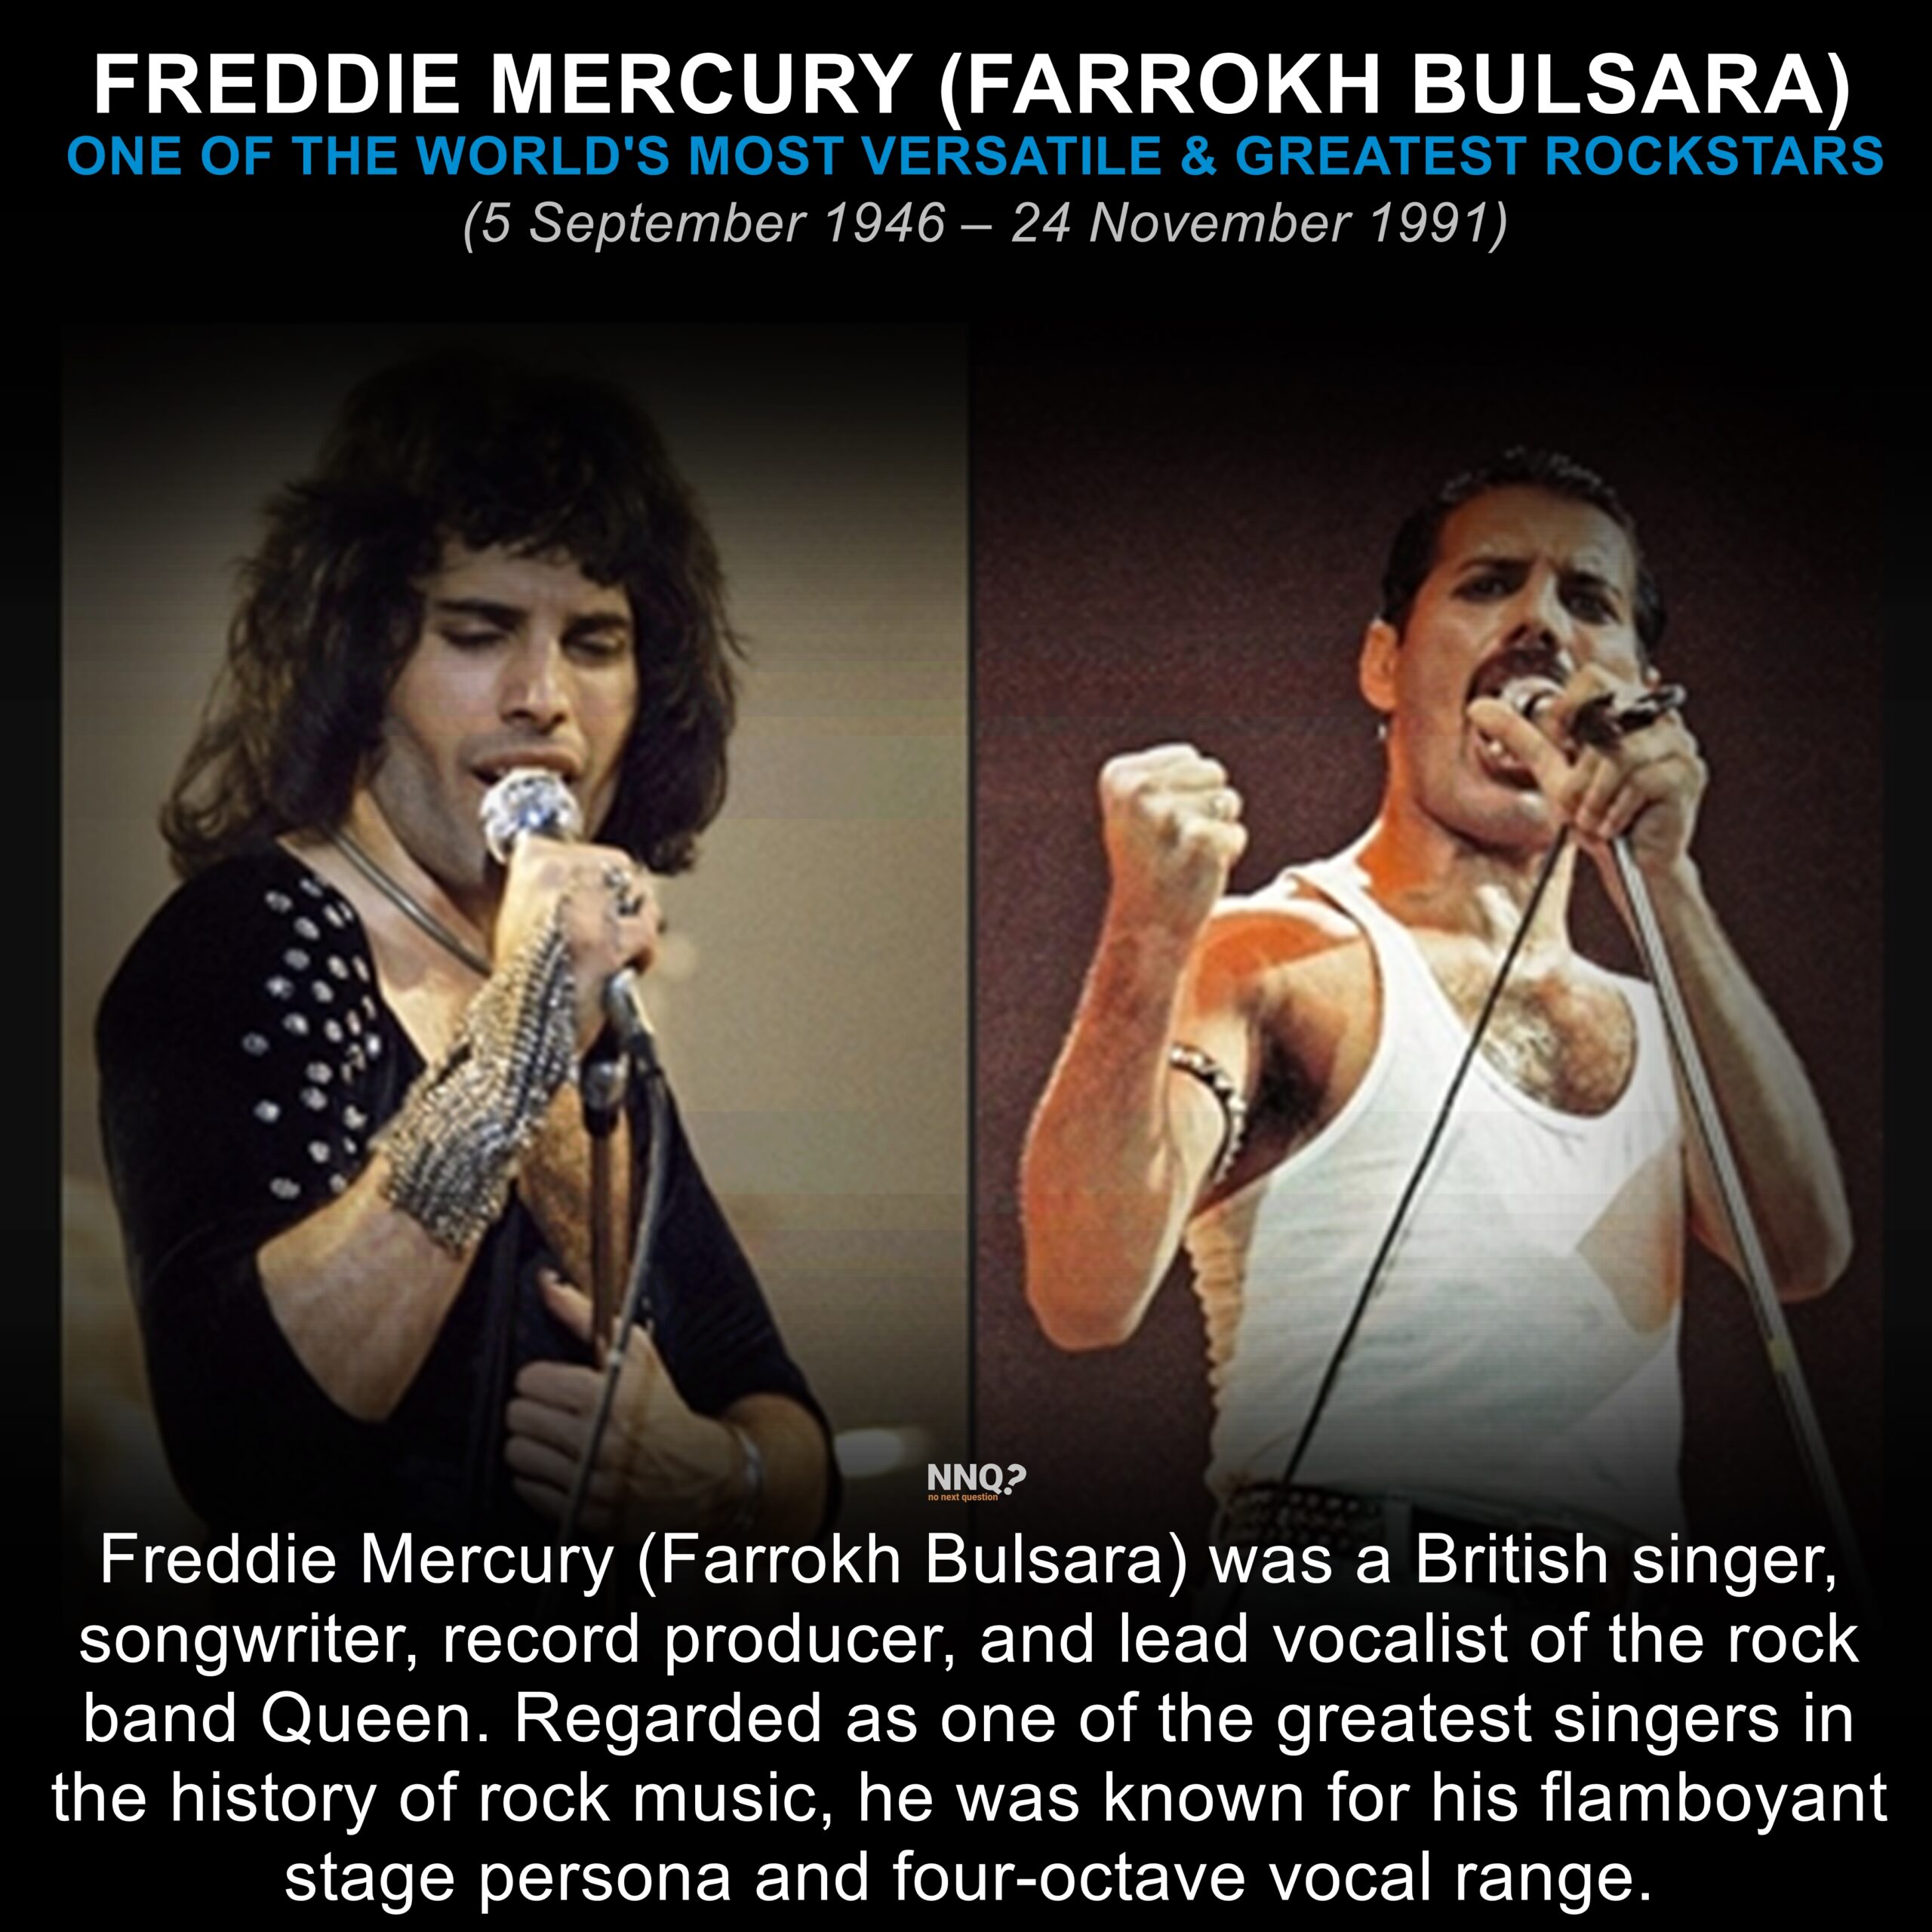 Freddie Mercury : One of the most versatile & greatest singers of all time.